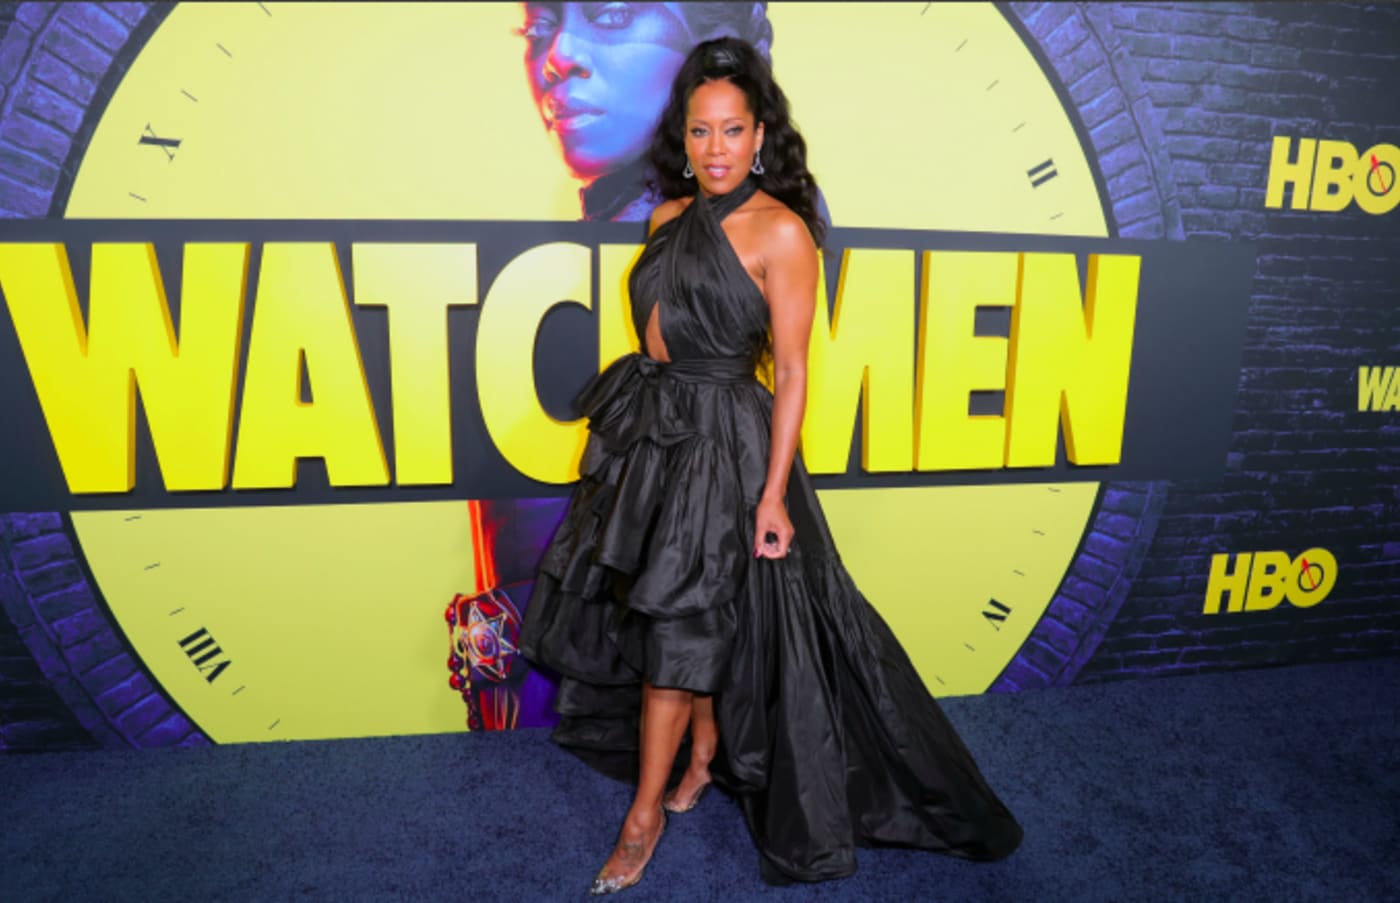 Regina King attends the premiere of HBO's "Watchmen" at The Cinerama Dome